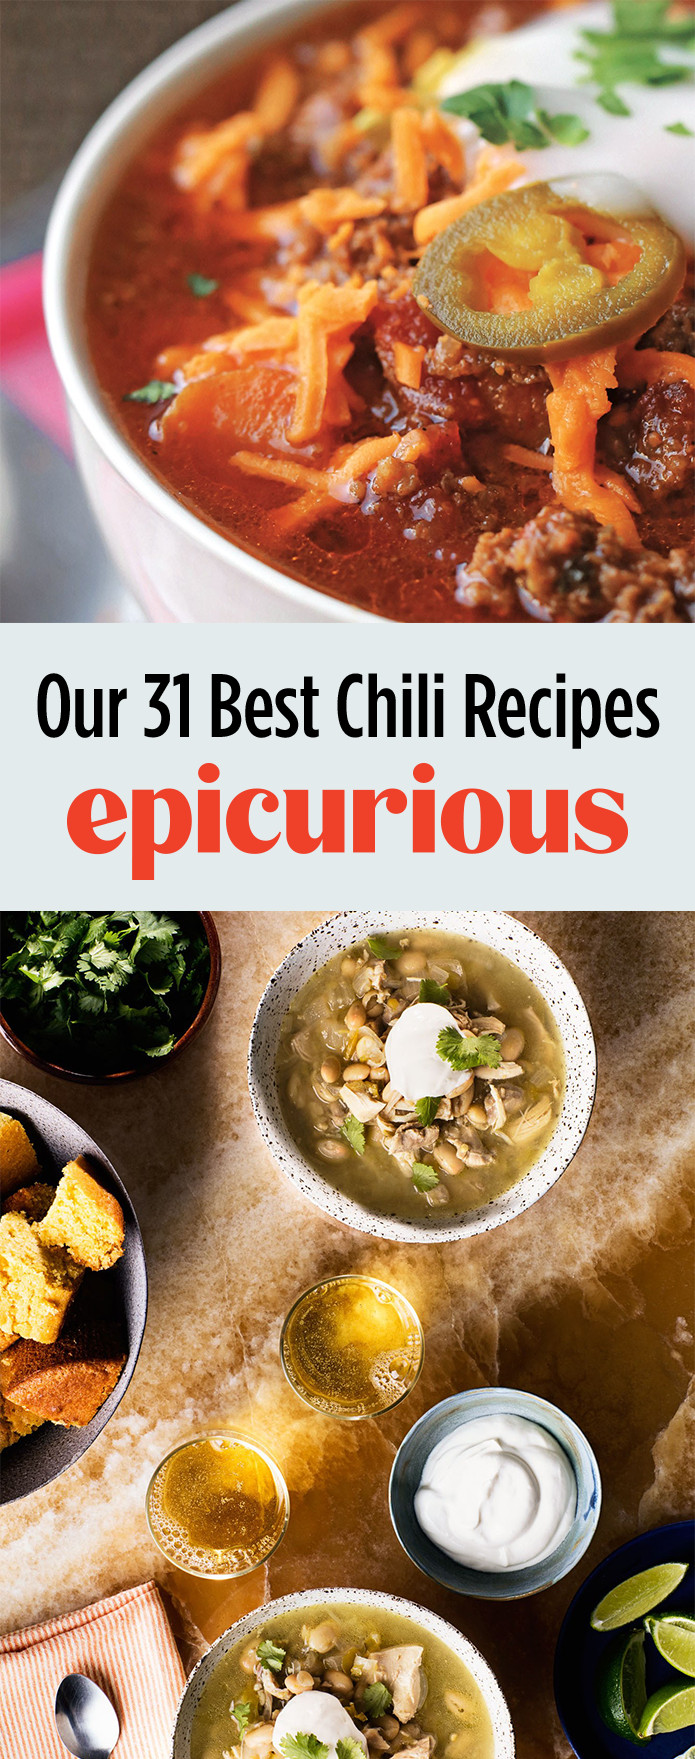 Vegetarian Chili Epicurious
 Our 33 Best Chili Recipes